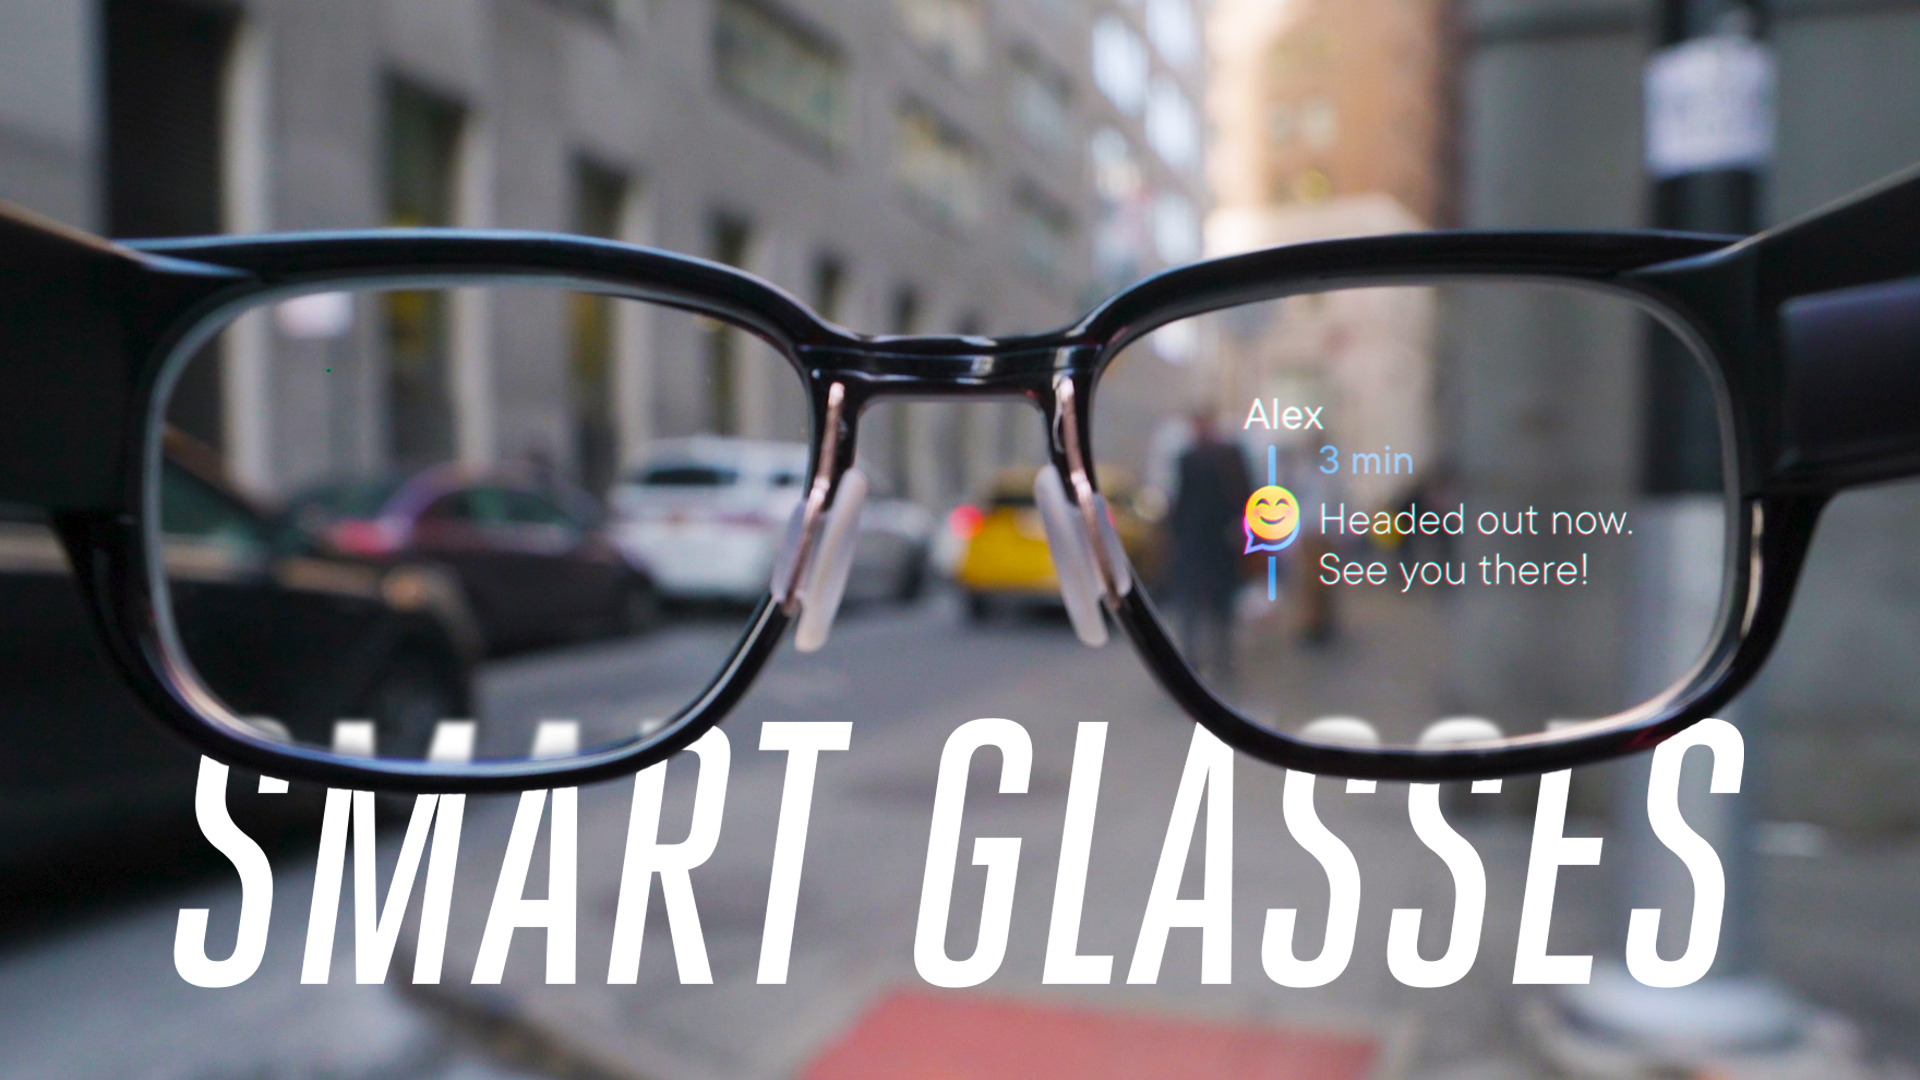 North Focals glasses review: a $600 smartwatch for your face - The